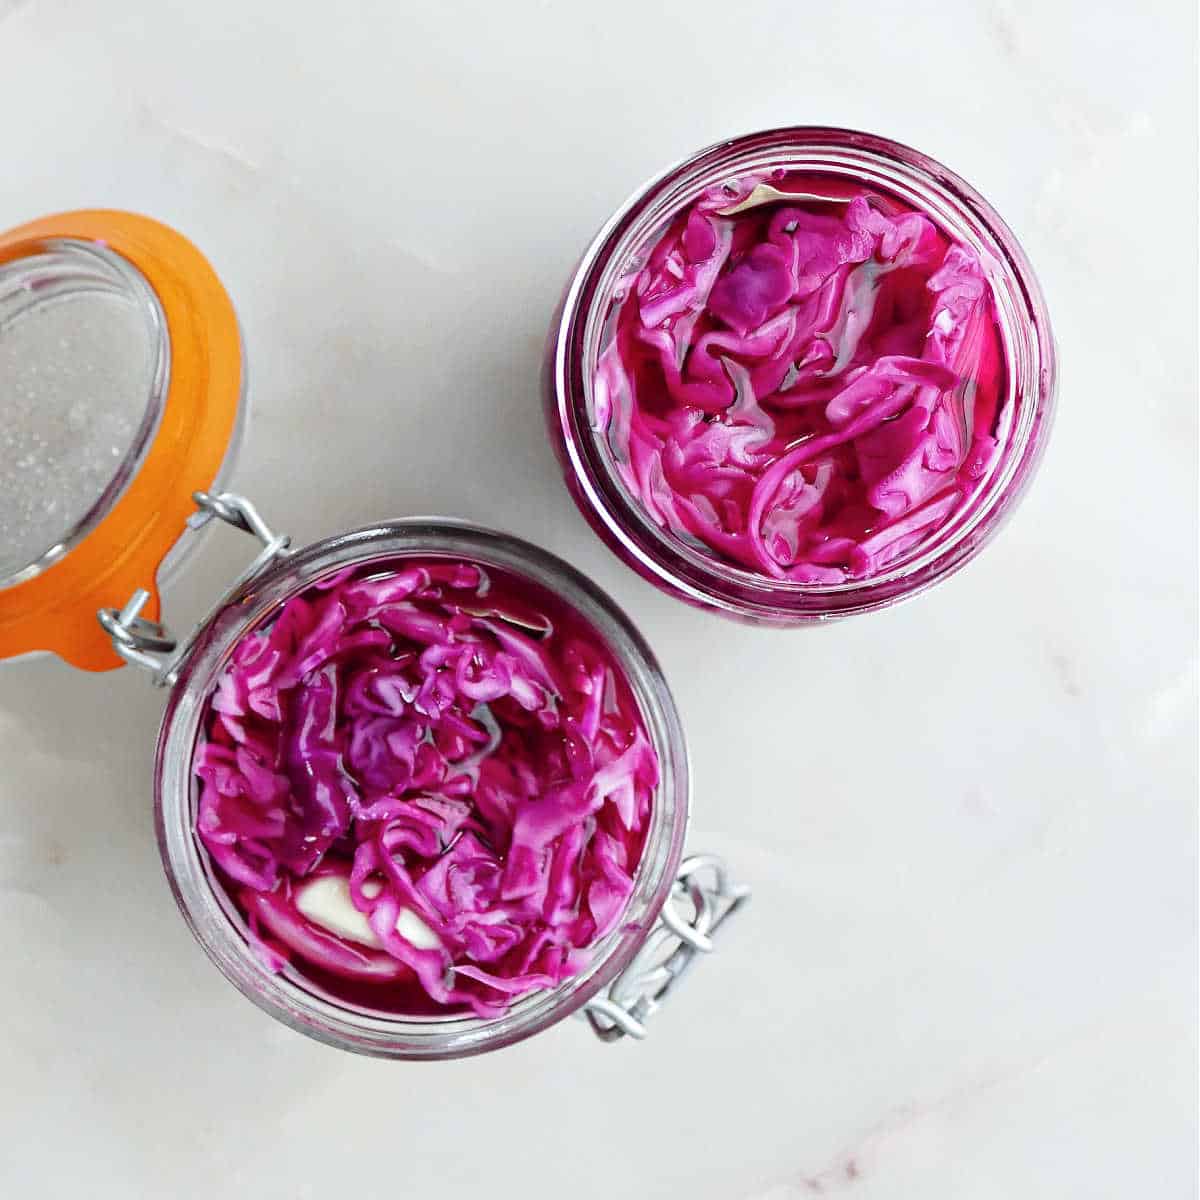 Two glass jars with pickled red cabbage after sitting for a few hours.